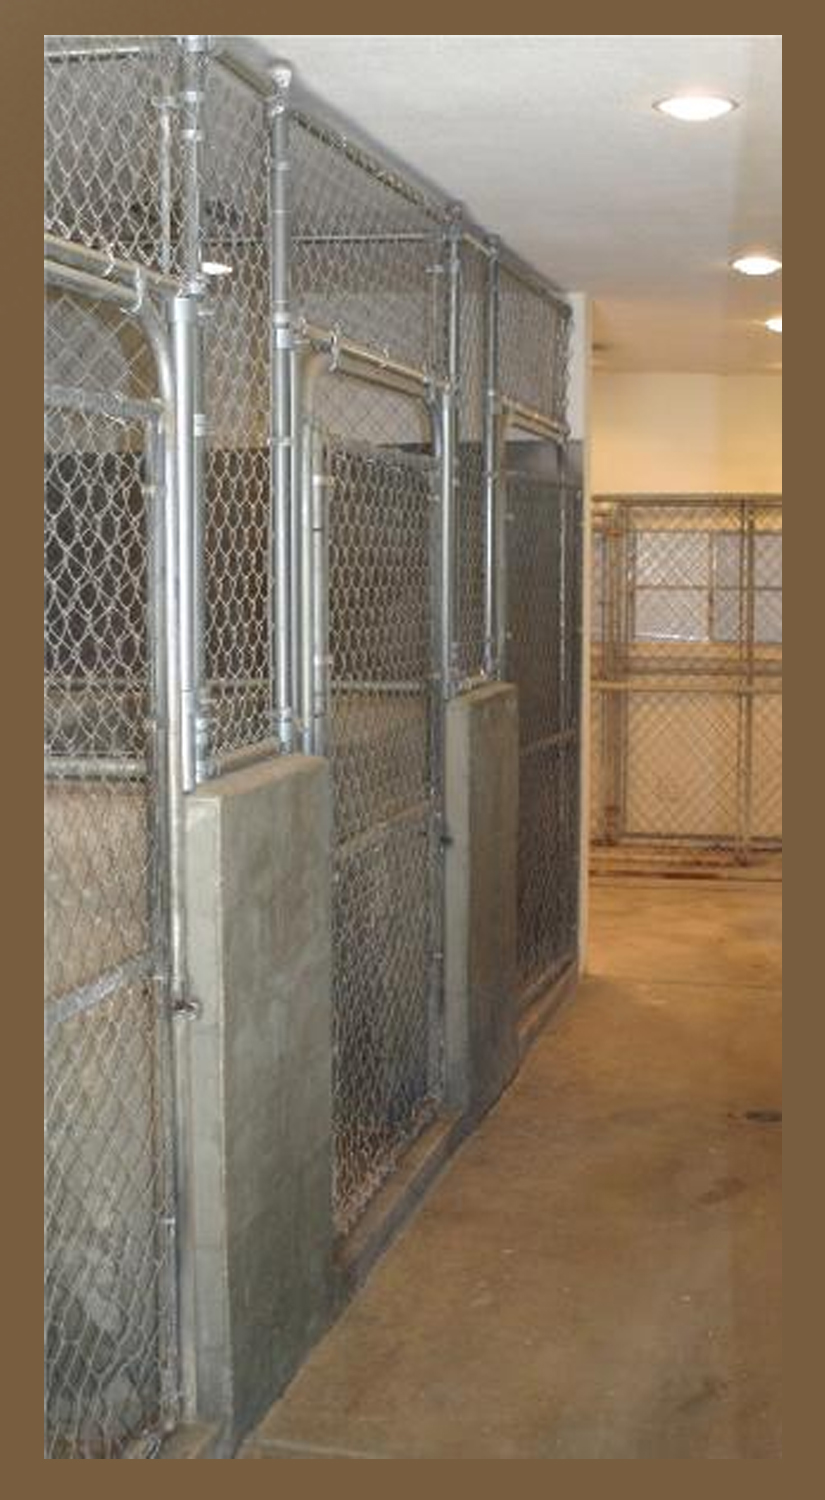 Heated and air conditioned kennels